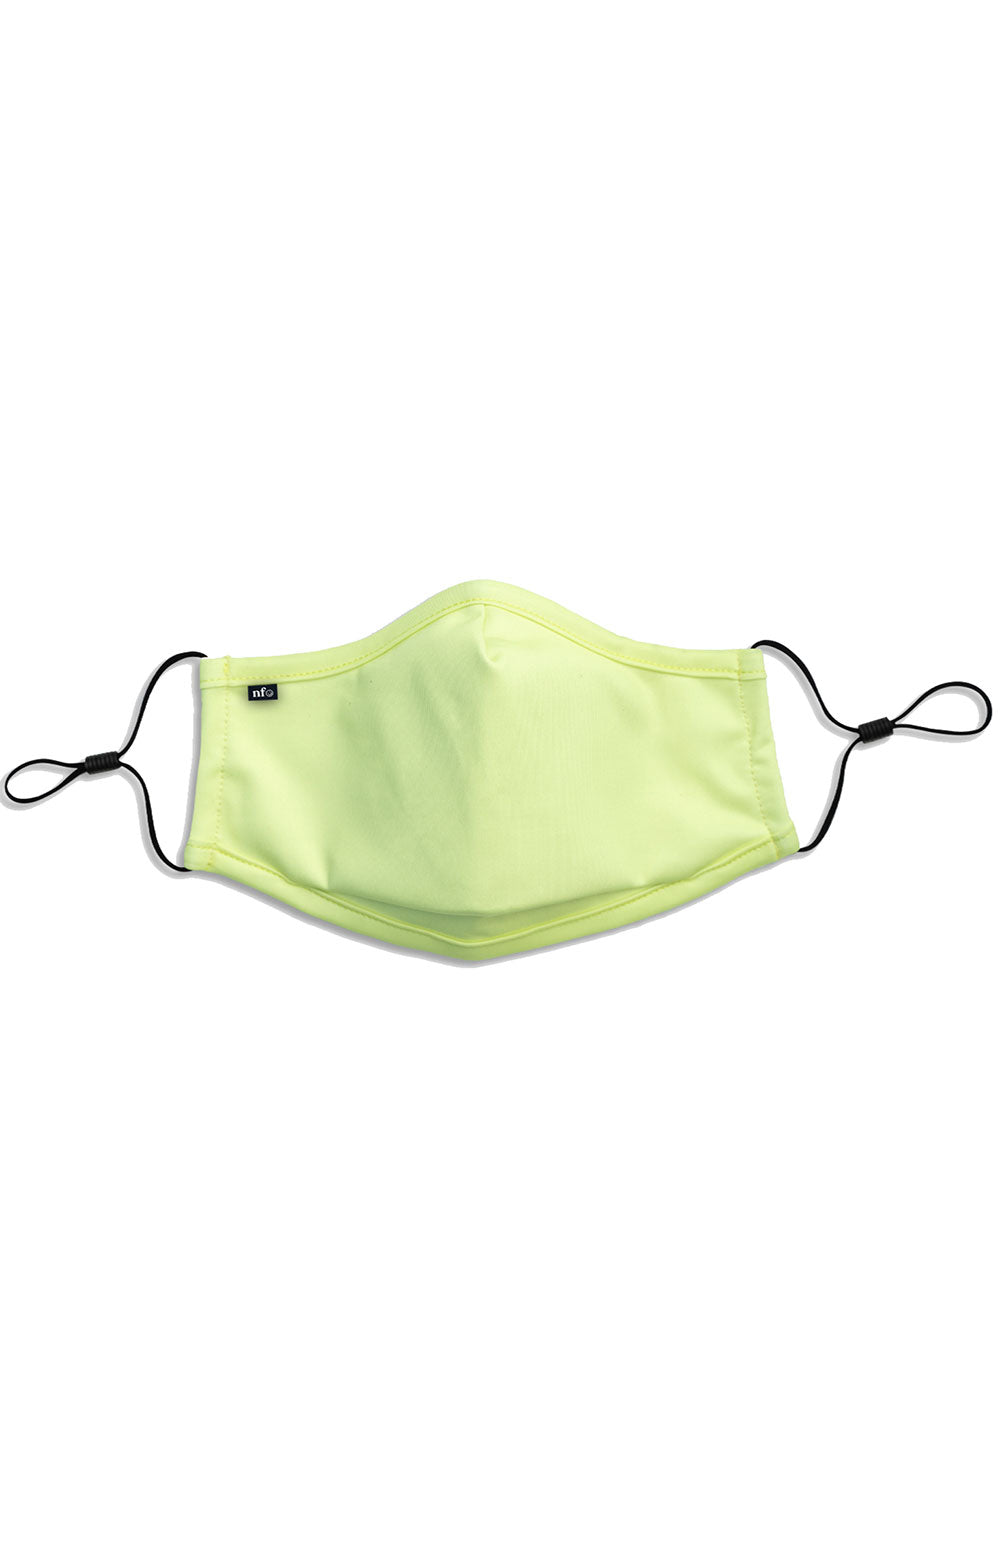 Adult Anti Bacterial Knit Face Mask - Neon